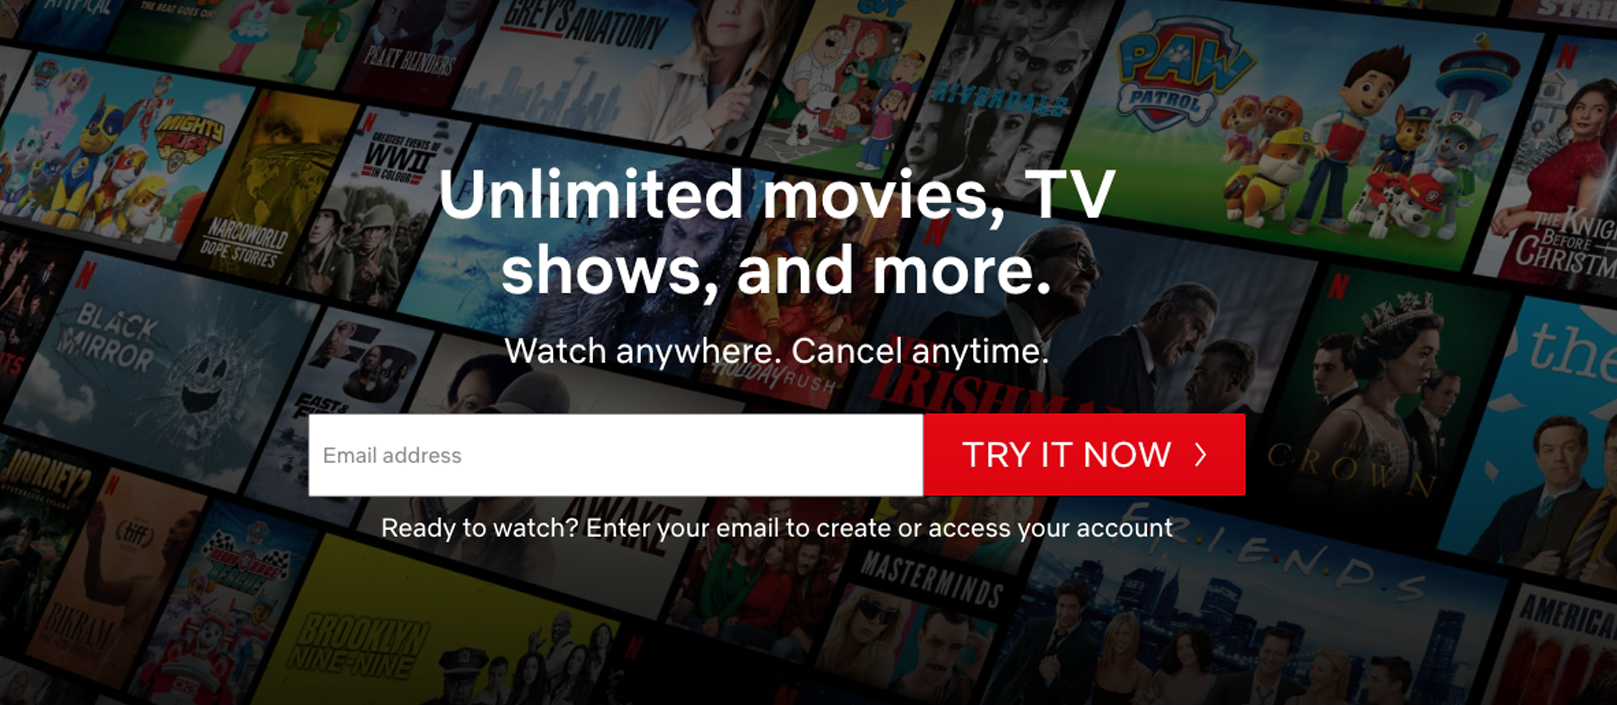 Netflix CTA used as an example of web design best practices